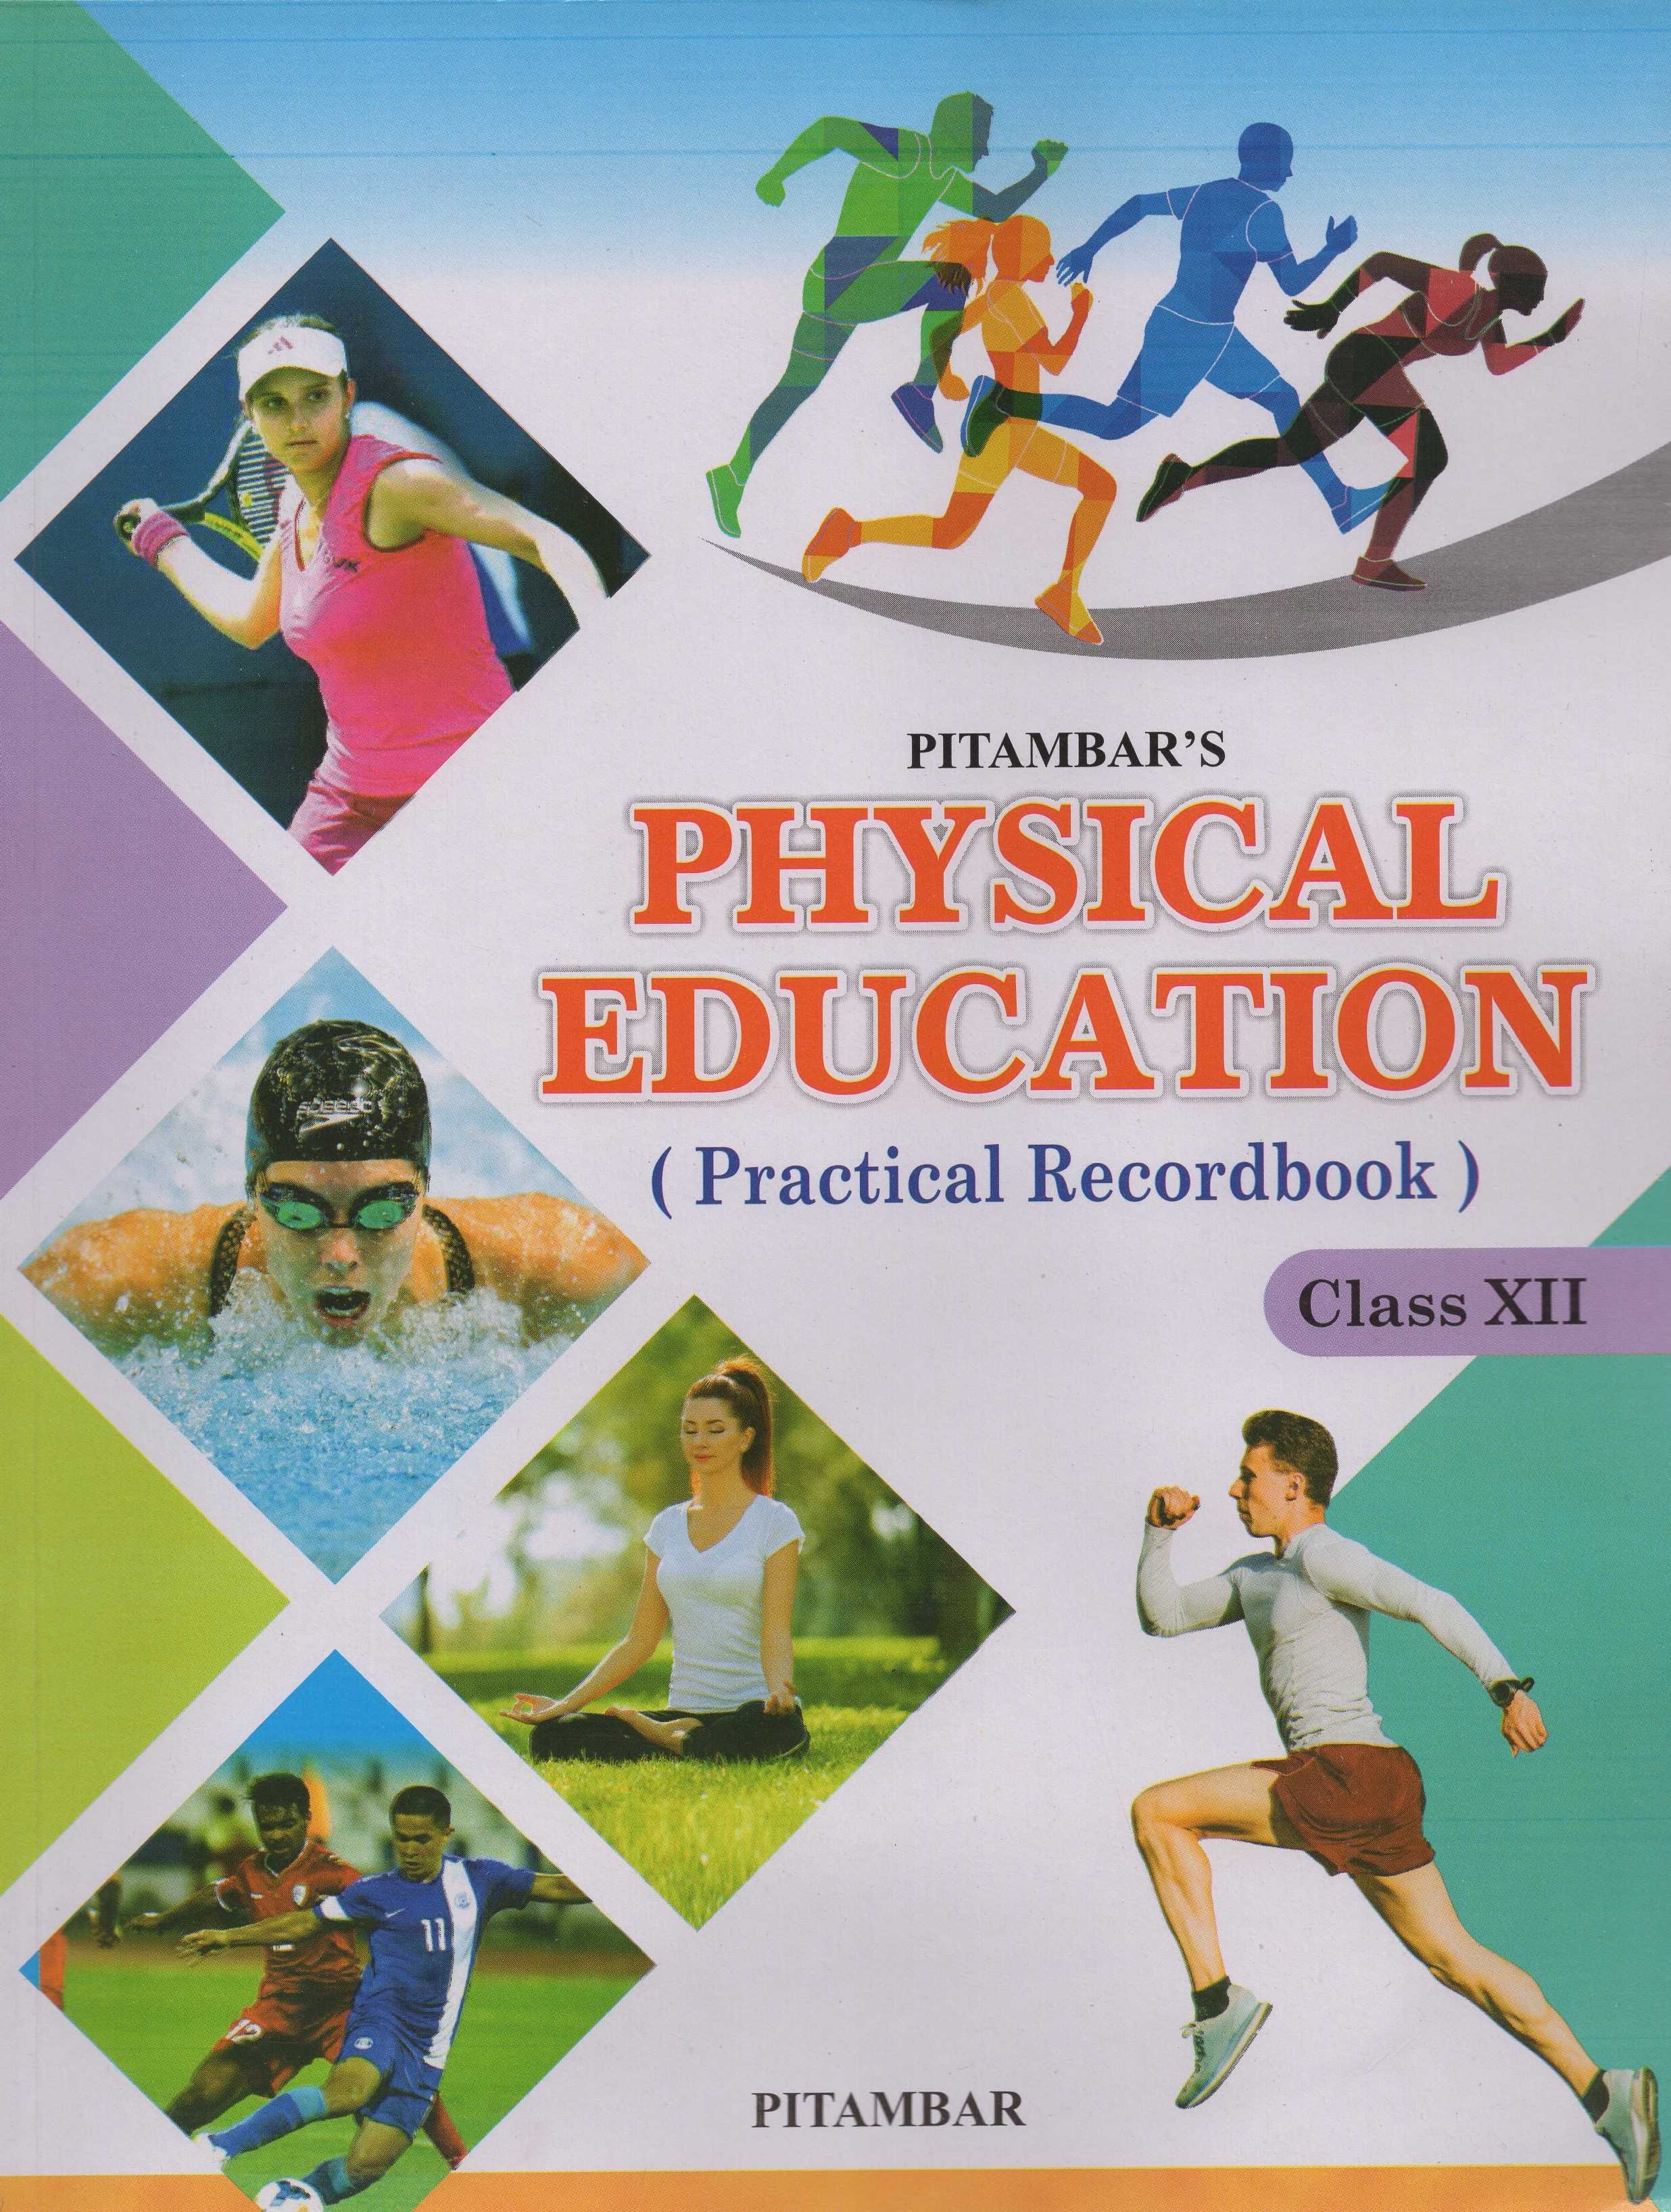 Physical Education (Practice Recordbook) For Class - XII